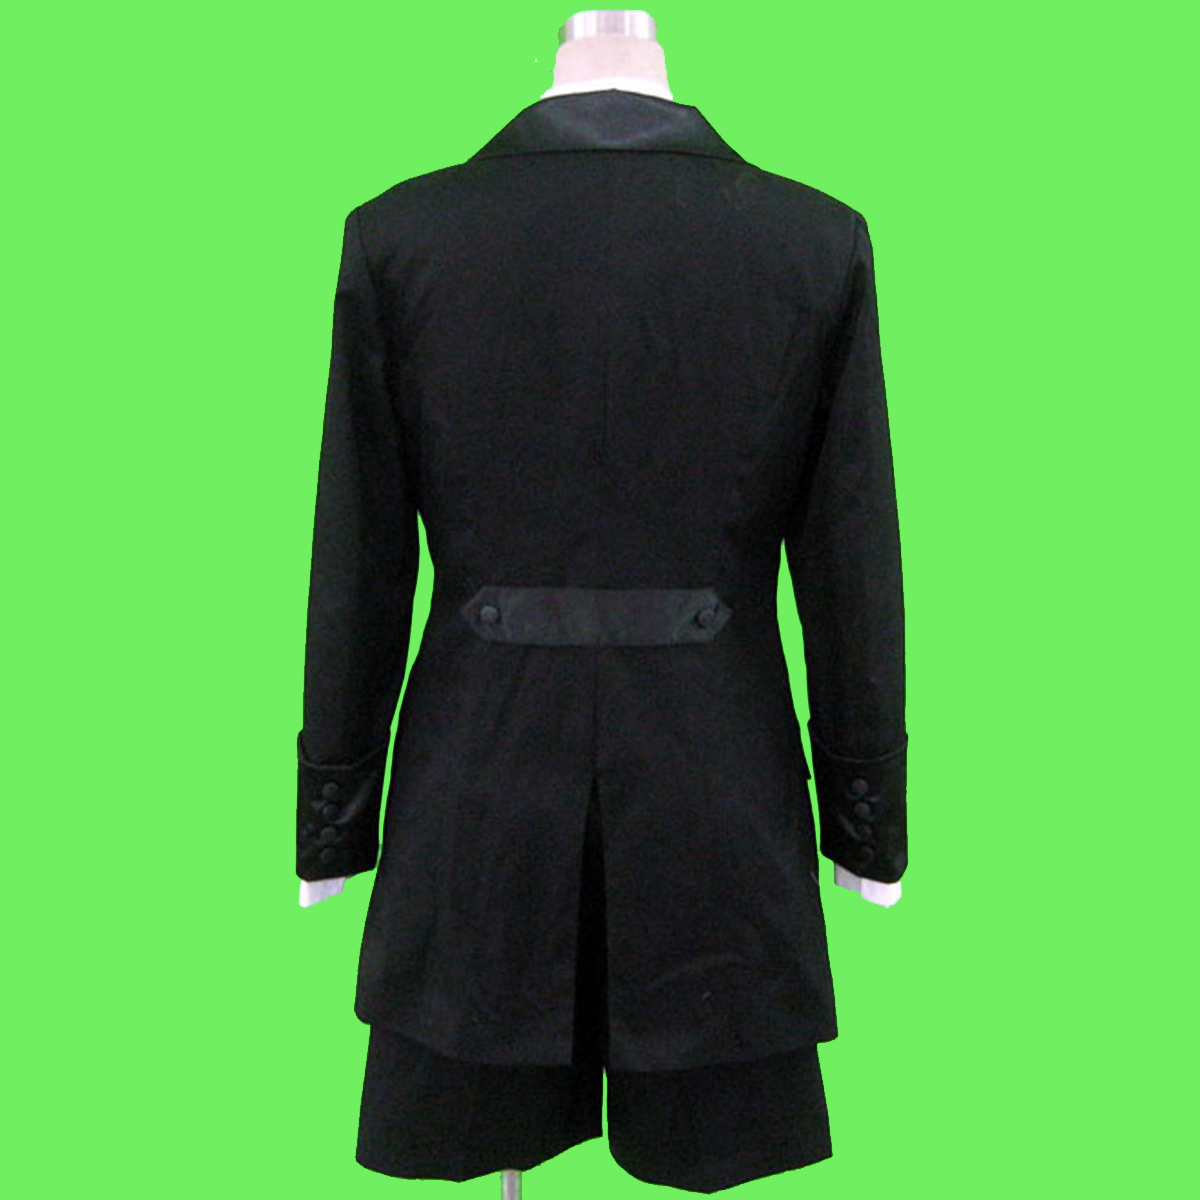 Black Butler Ciel Phantomhive 4 Anime Cosplay Costumes Outfit